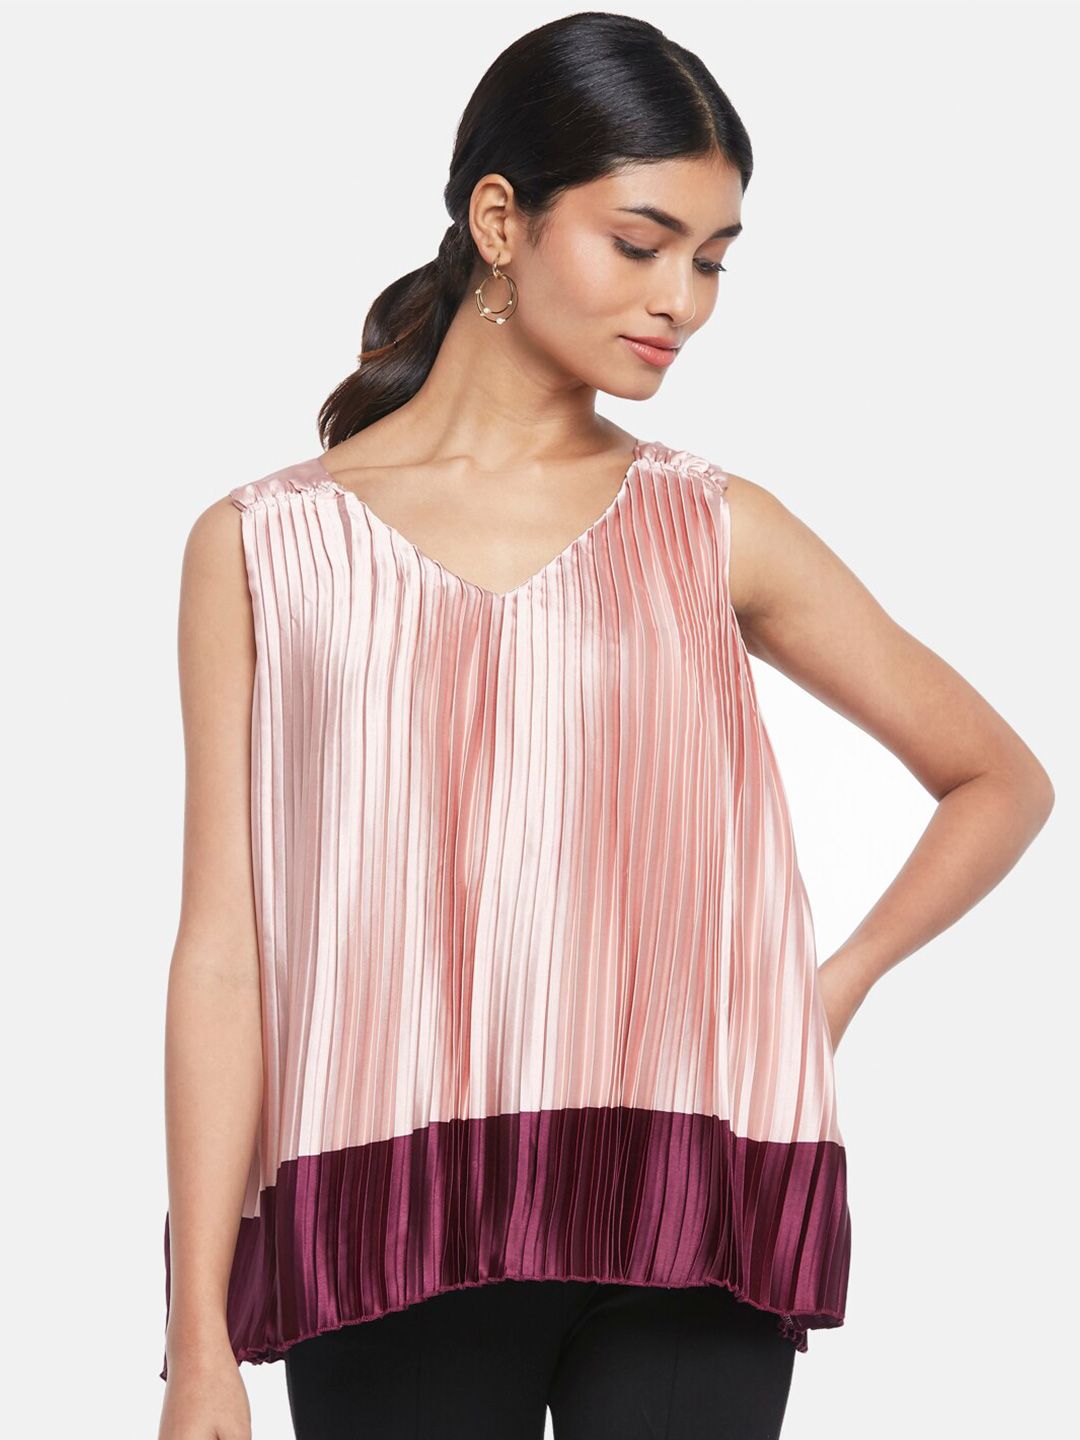 Annabelle by Pantaloons Women Pink Striped Top Price in India